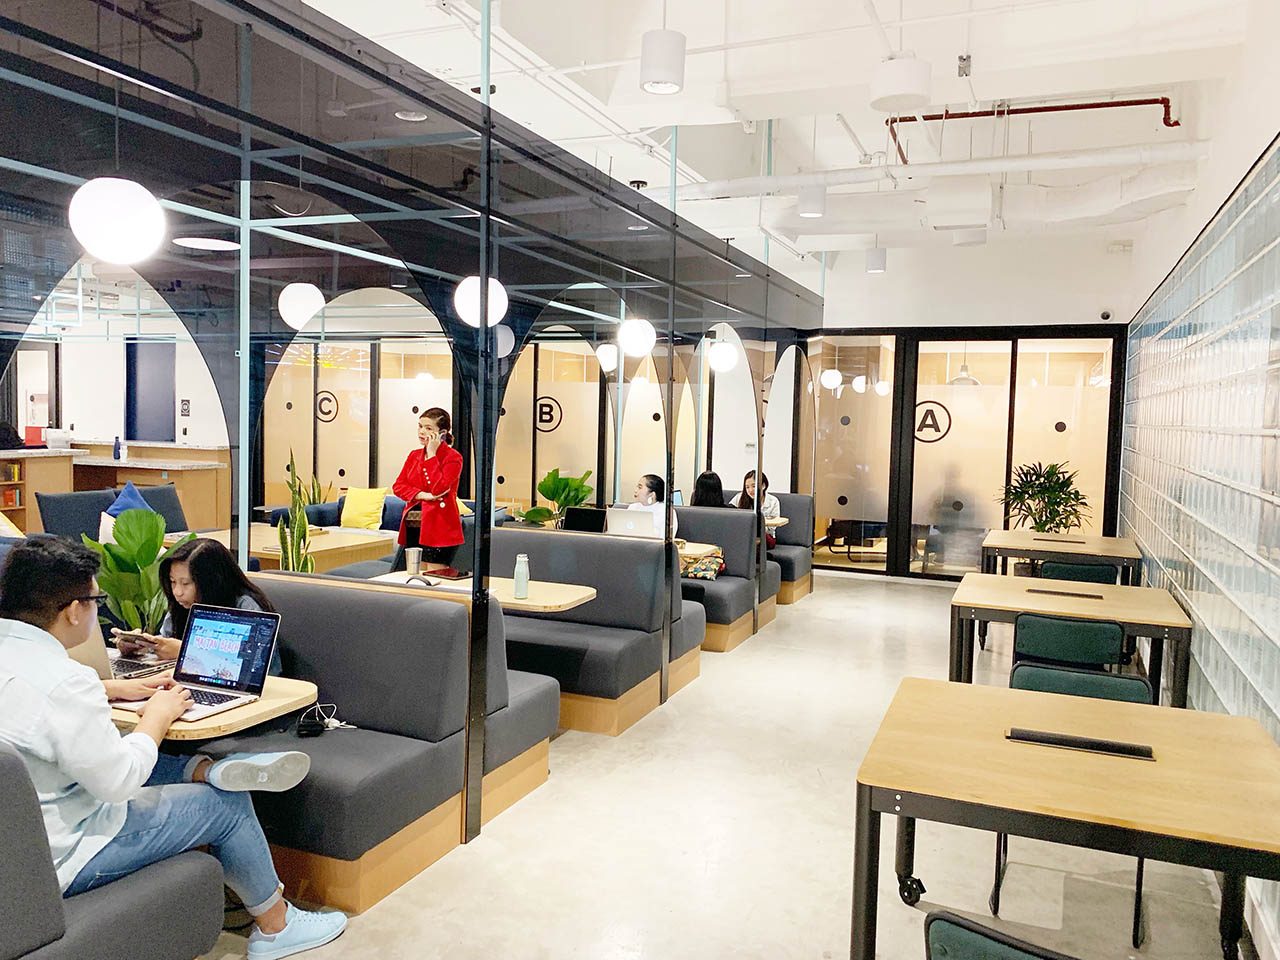 Megaworld-WeWork deal seen to draw more foreign firms to Philippines